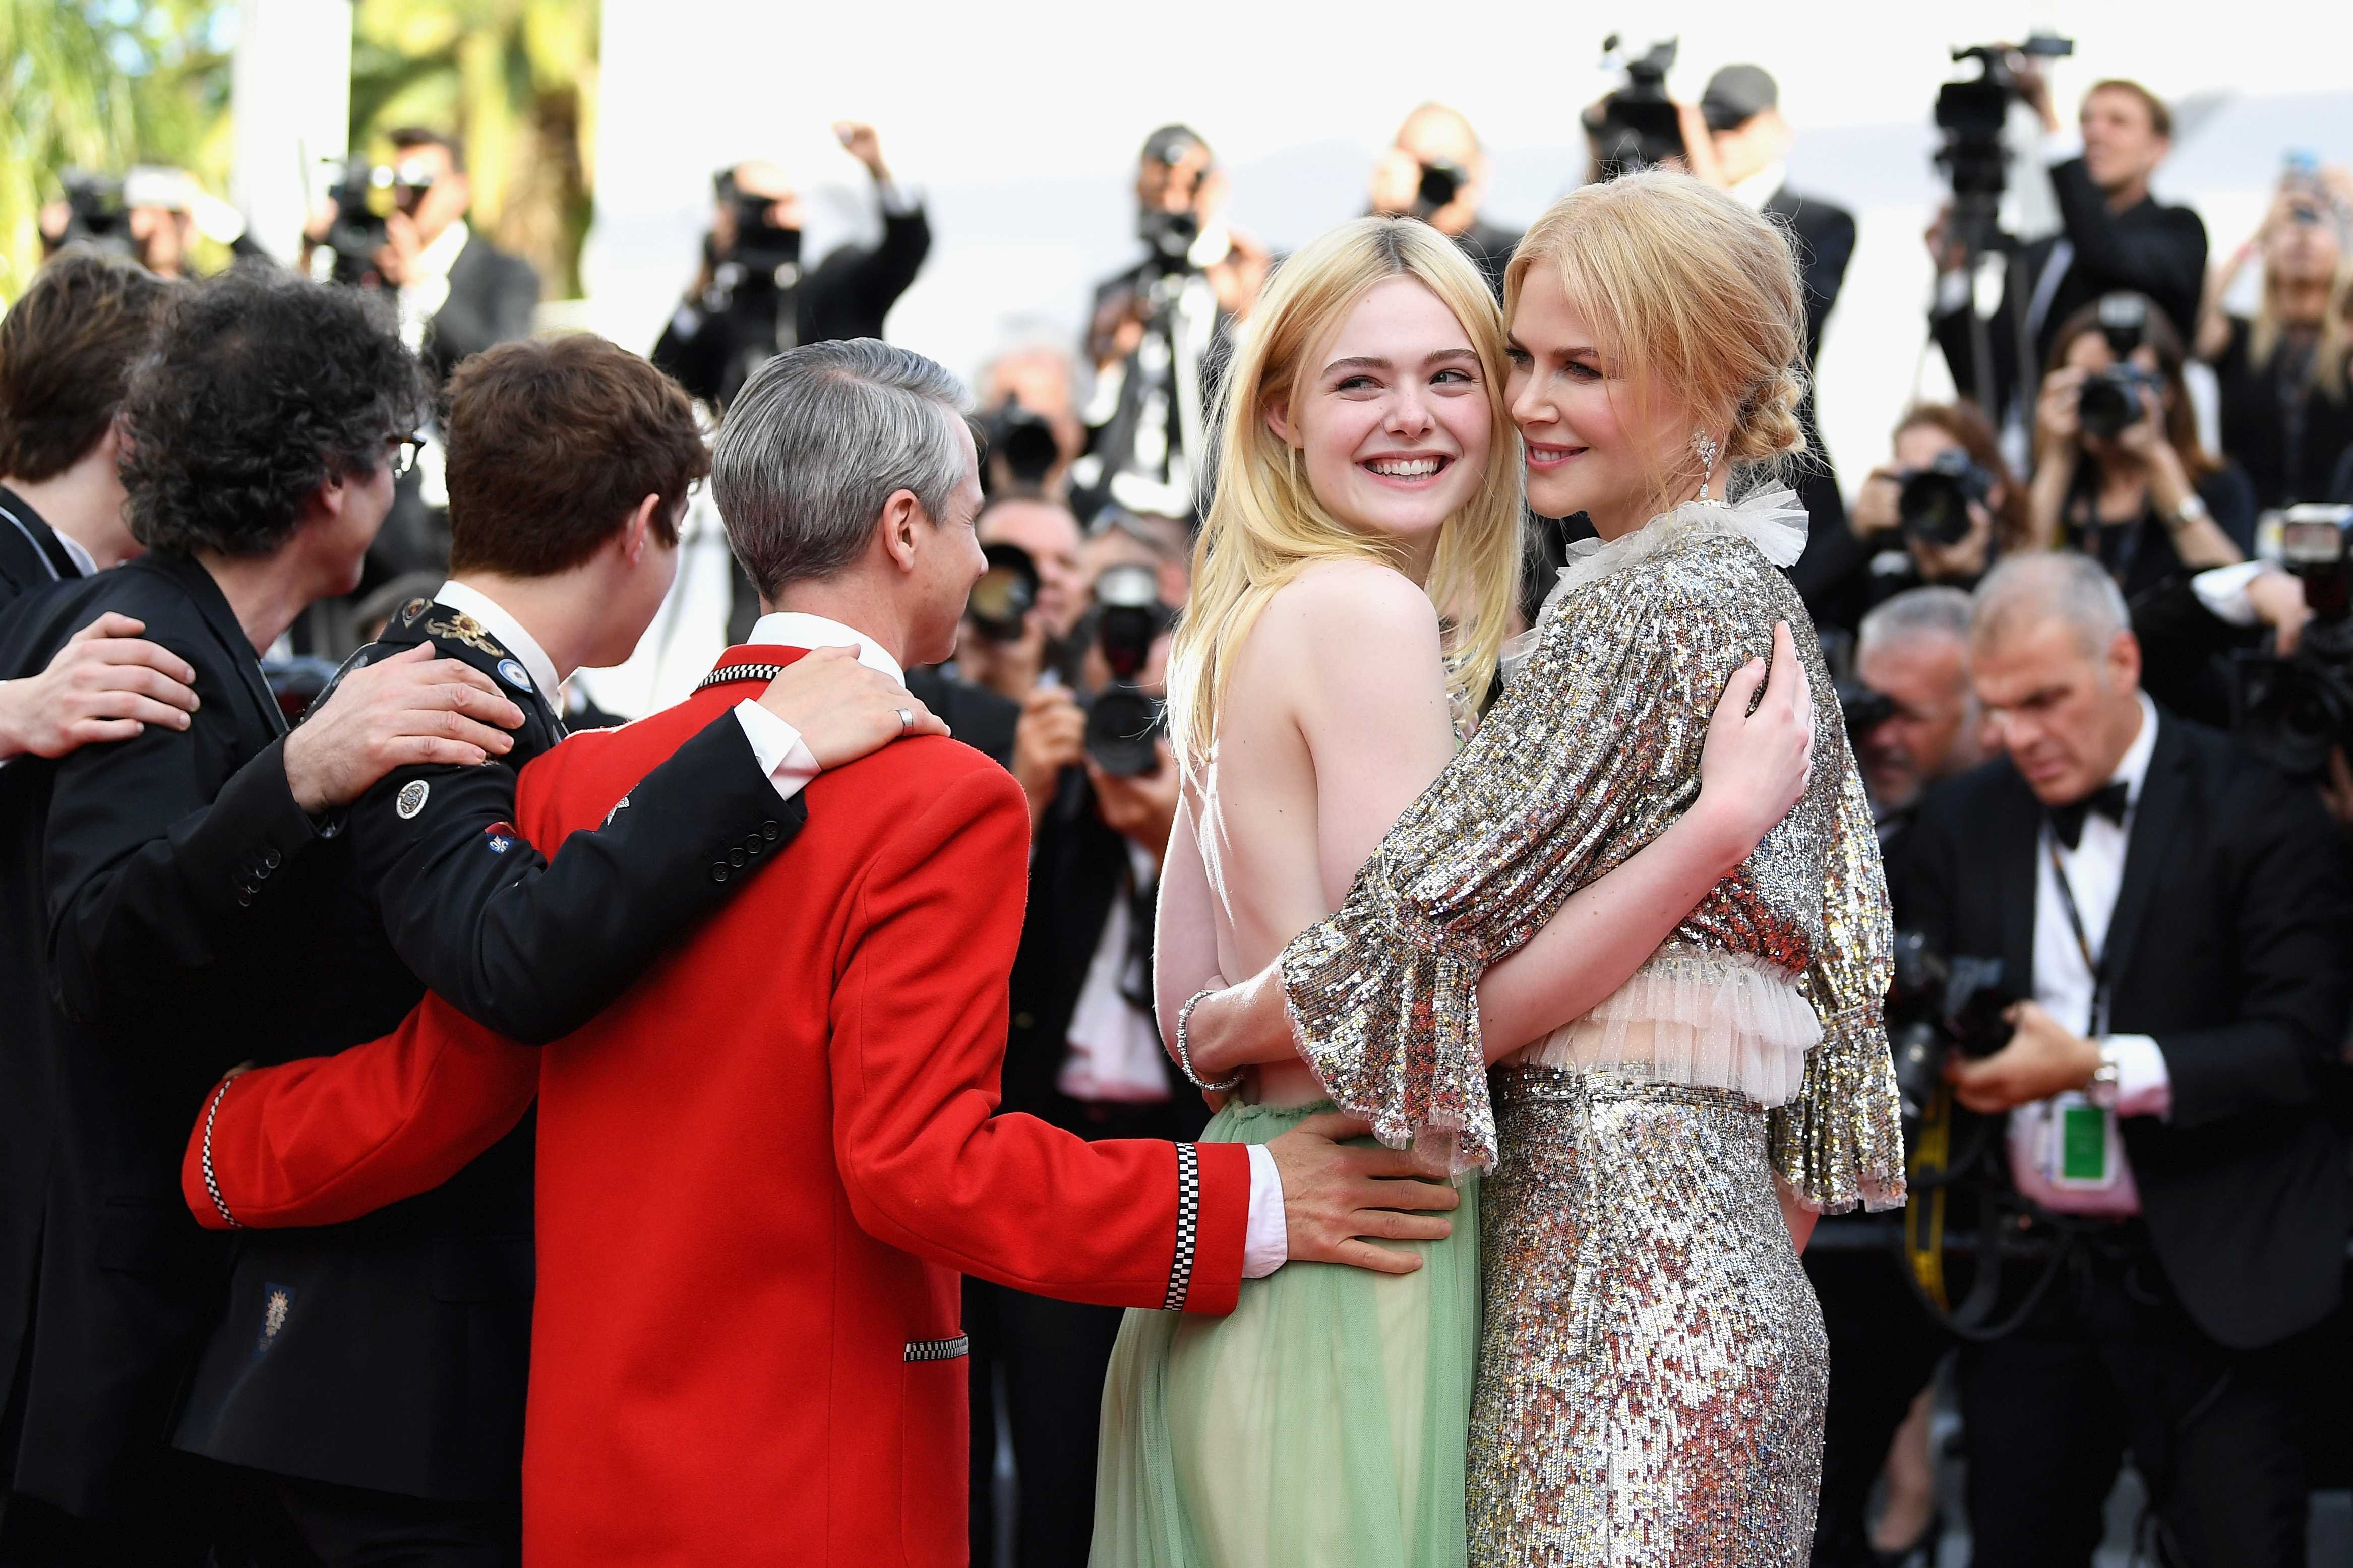 Elle Fanning Nicole Kidman On The Red Carpet Of How To Talk To Girls At Parties 第70回カンヌ映画祭のsf青春 パンク ロック映画 ハウ トゥ トーク トゥ ガールズ アット パーティーズ のプレミア上映のエルたんとニコール キッドマン Cia